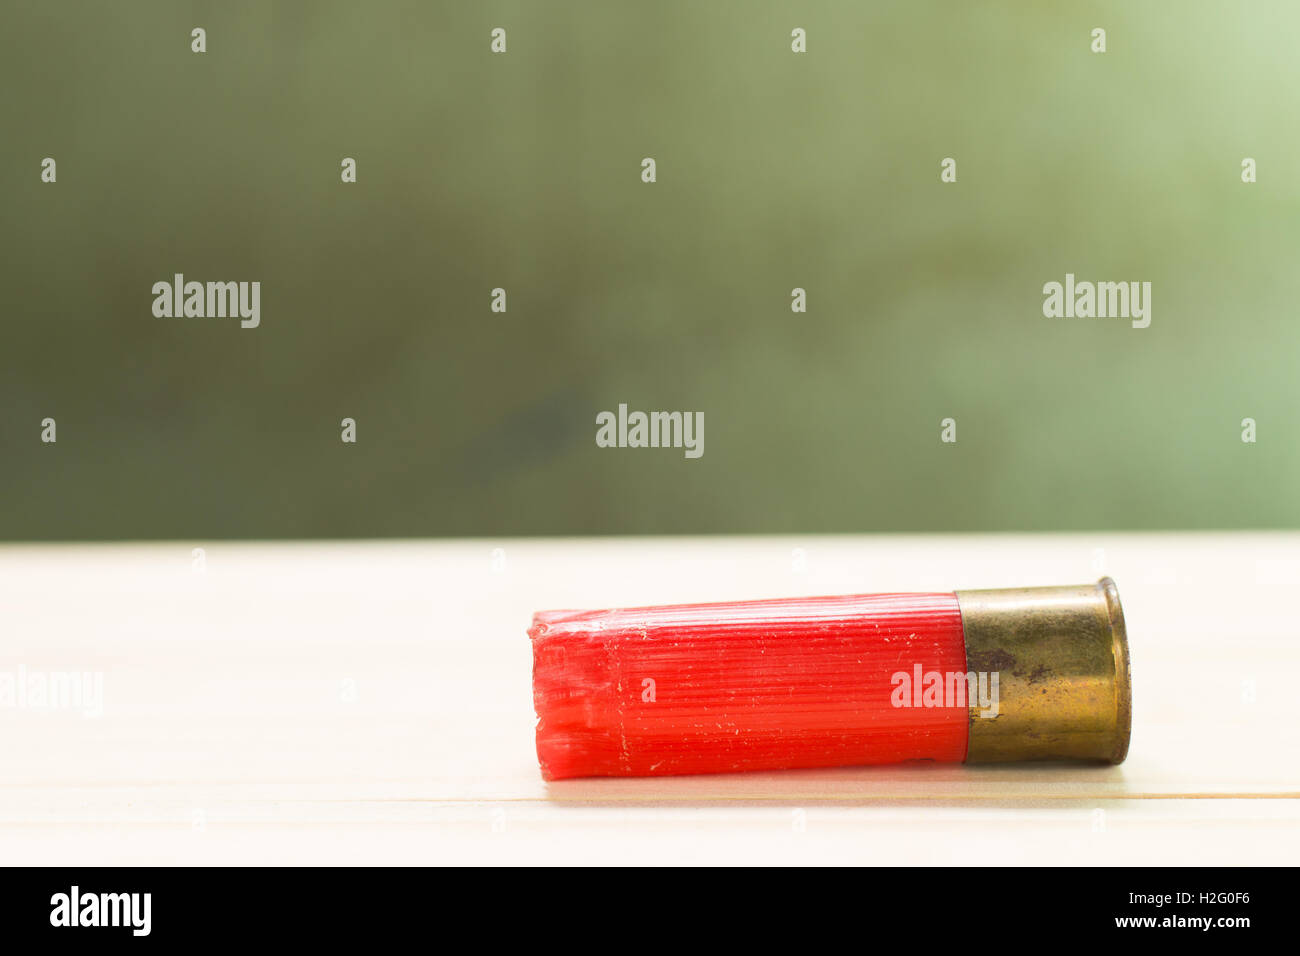 Through the use of shotgun shells lay on the wooden floor and green wall Background. Stock Photo